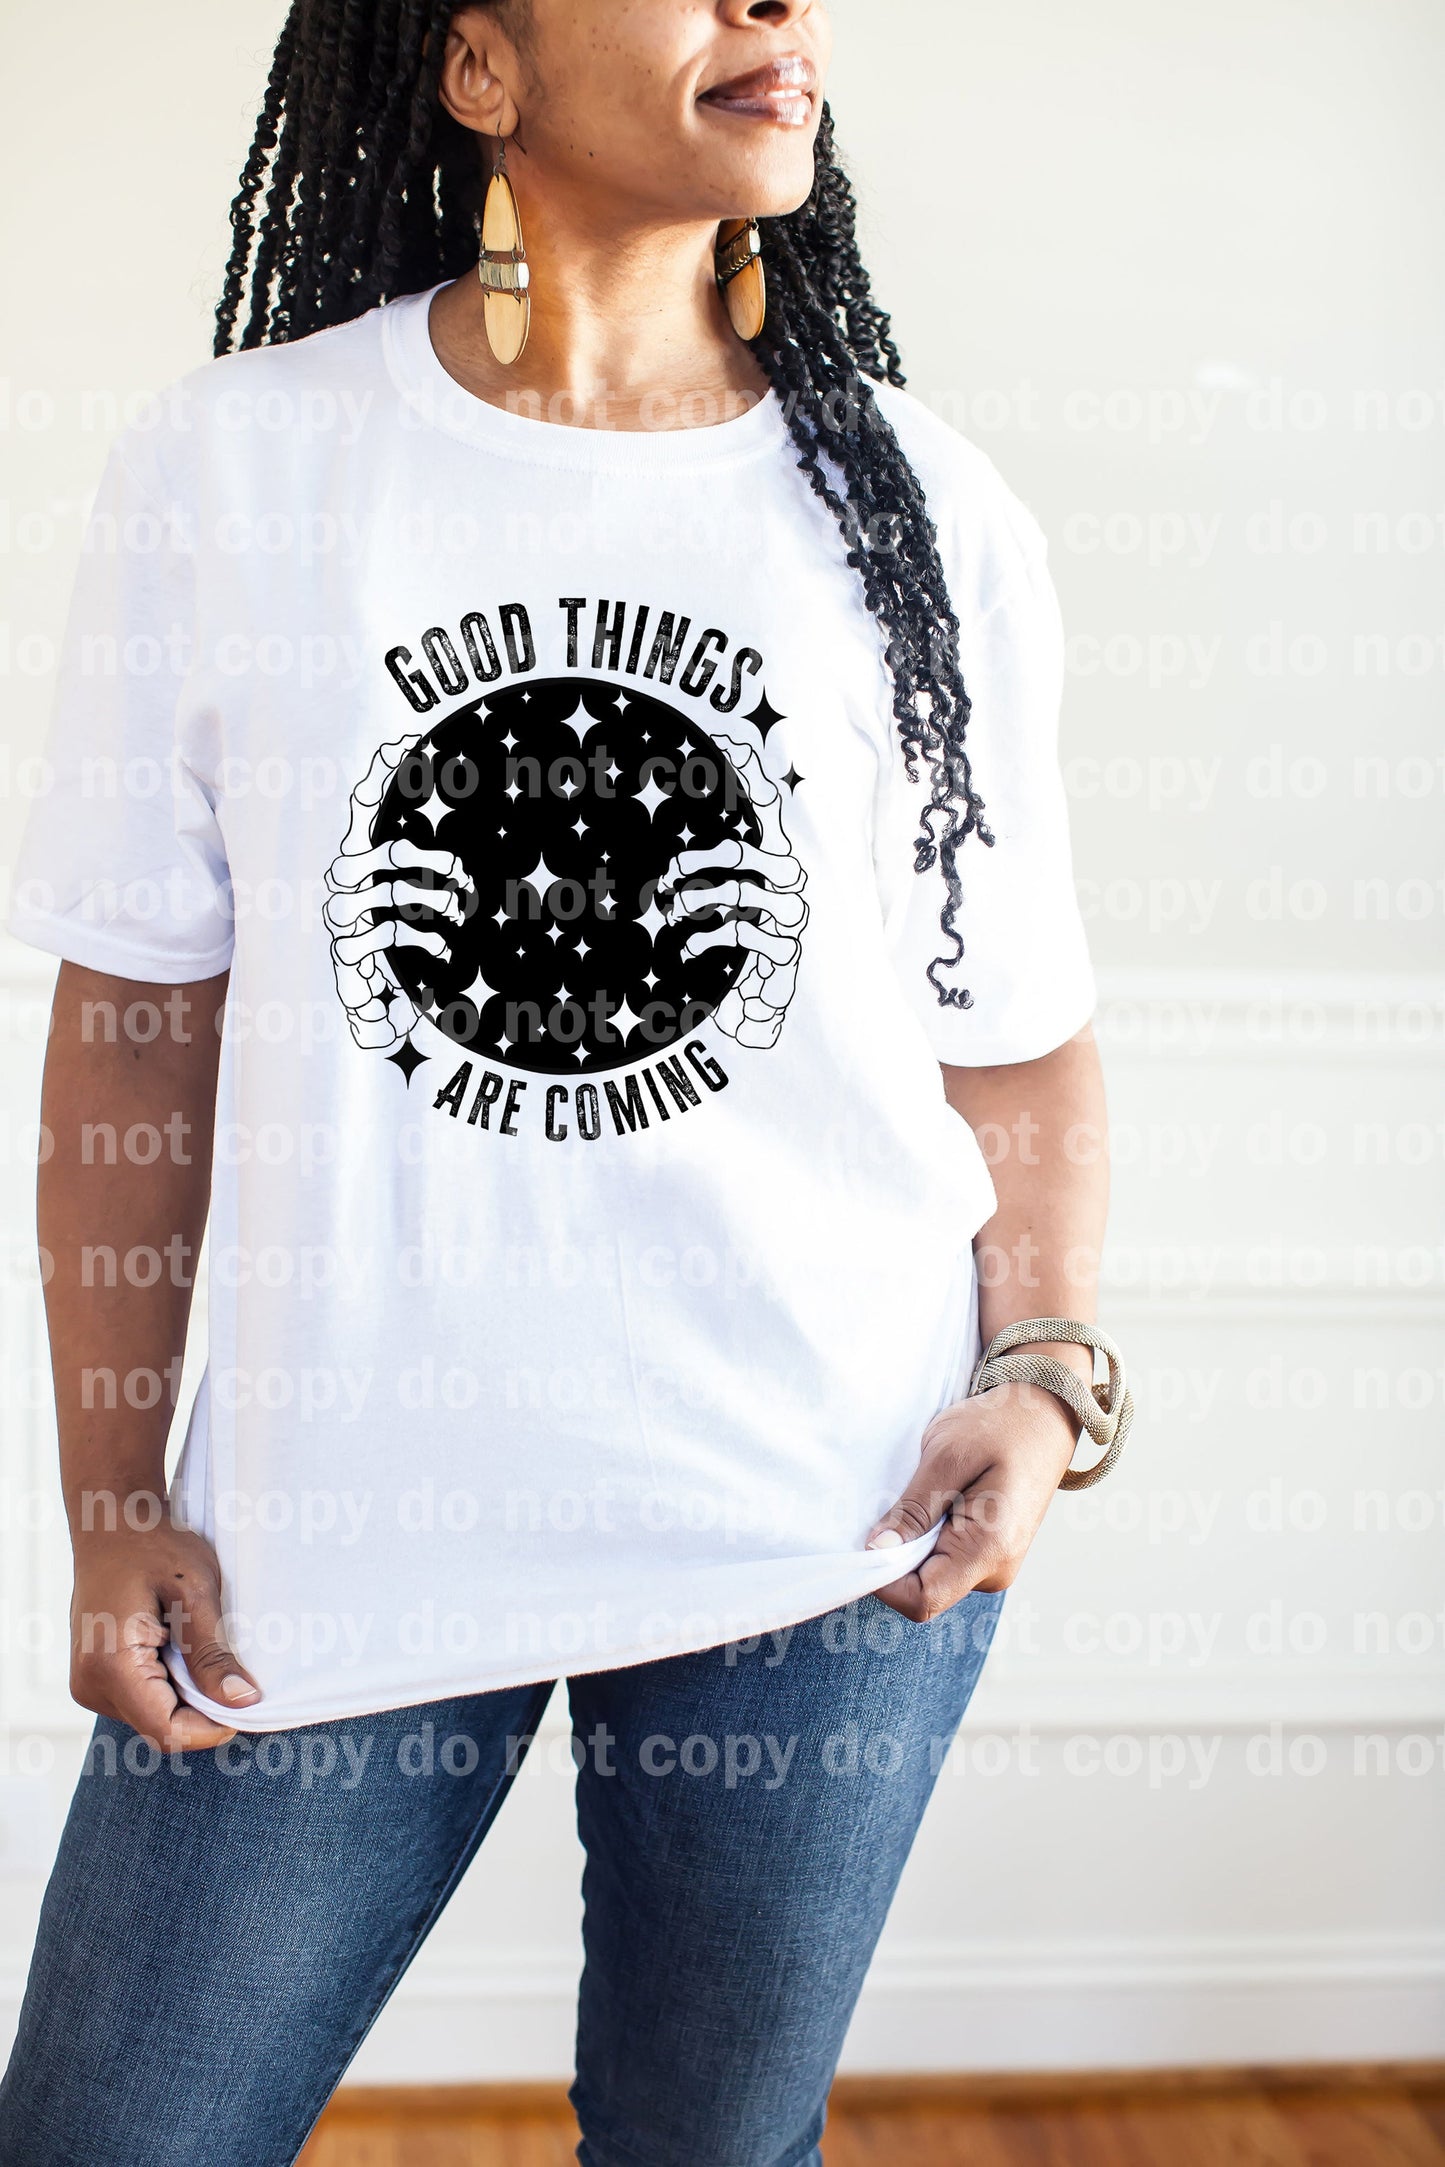 Good Things Are Coming Dream Print or Sublimation Print